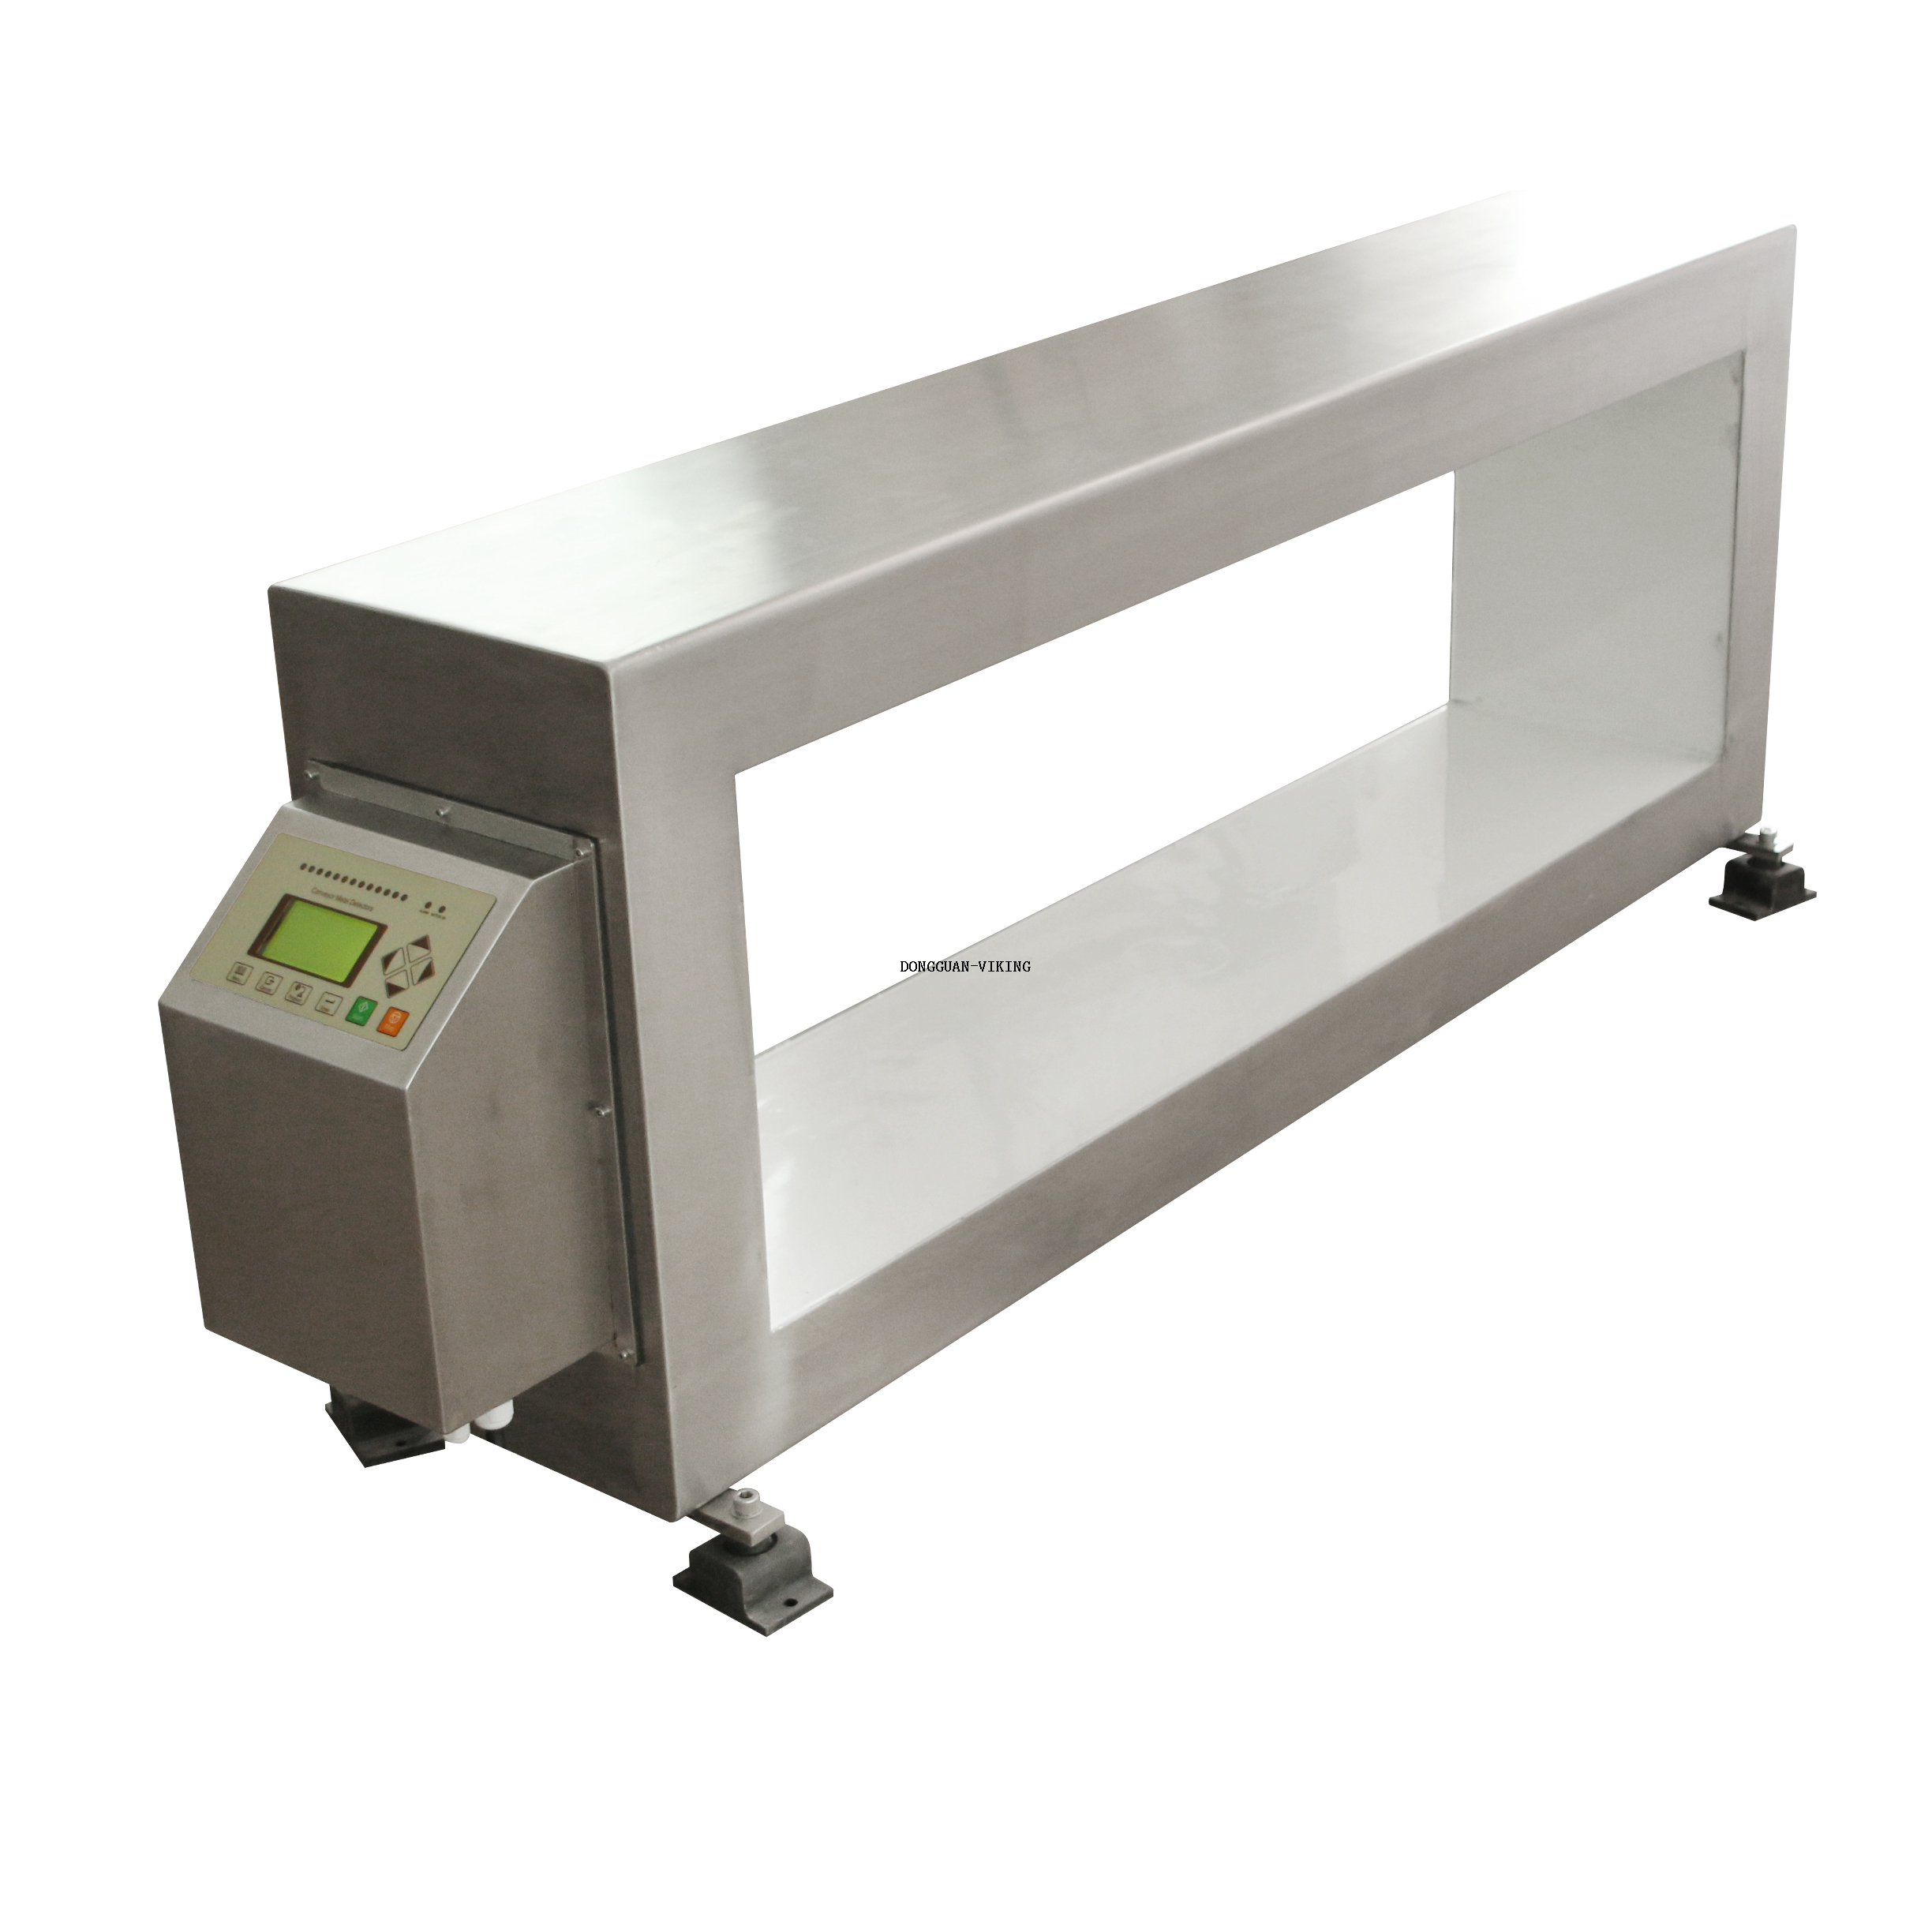 Supply in line metal detector for industrial 